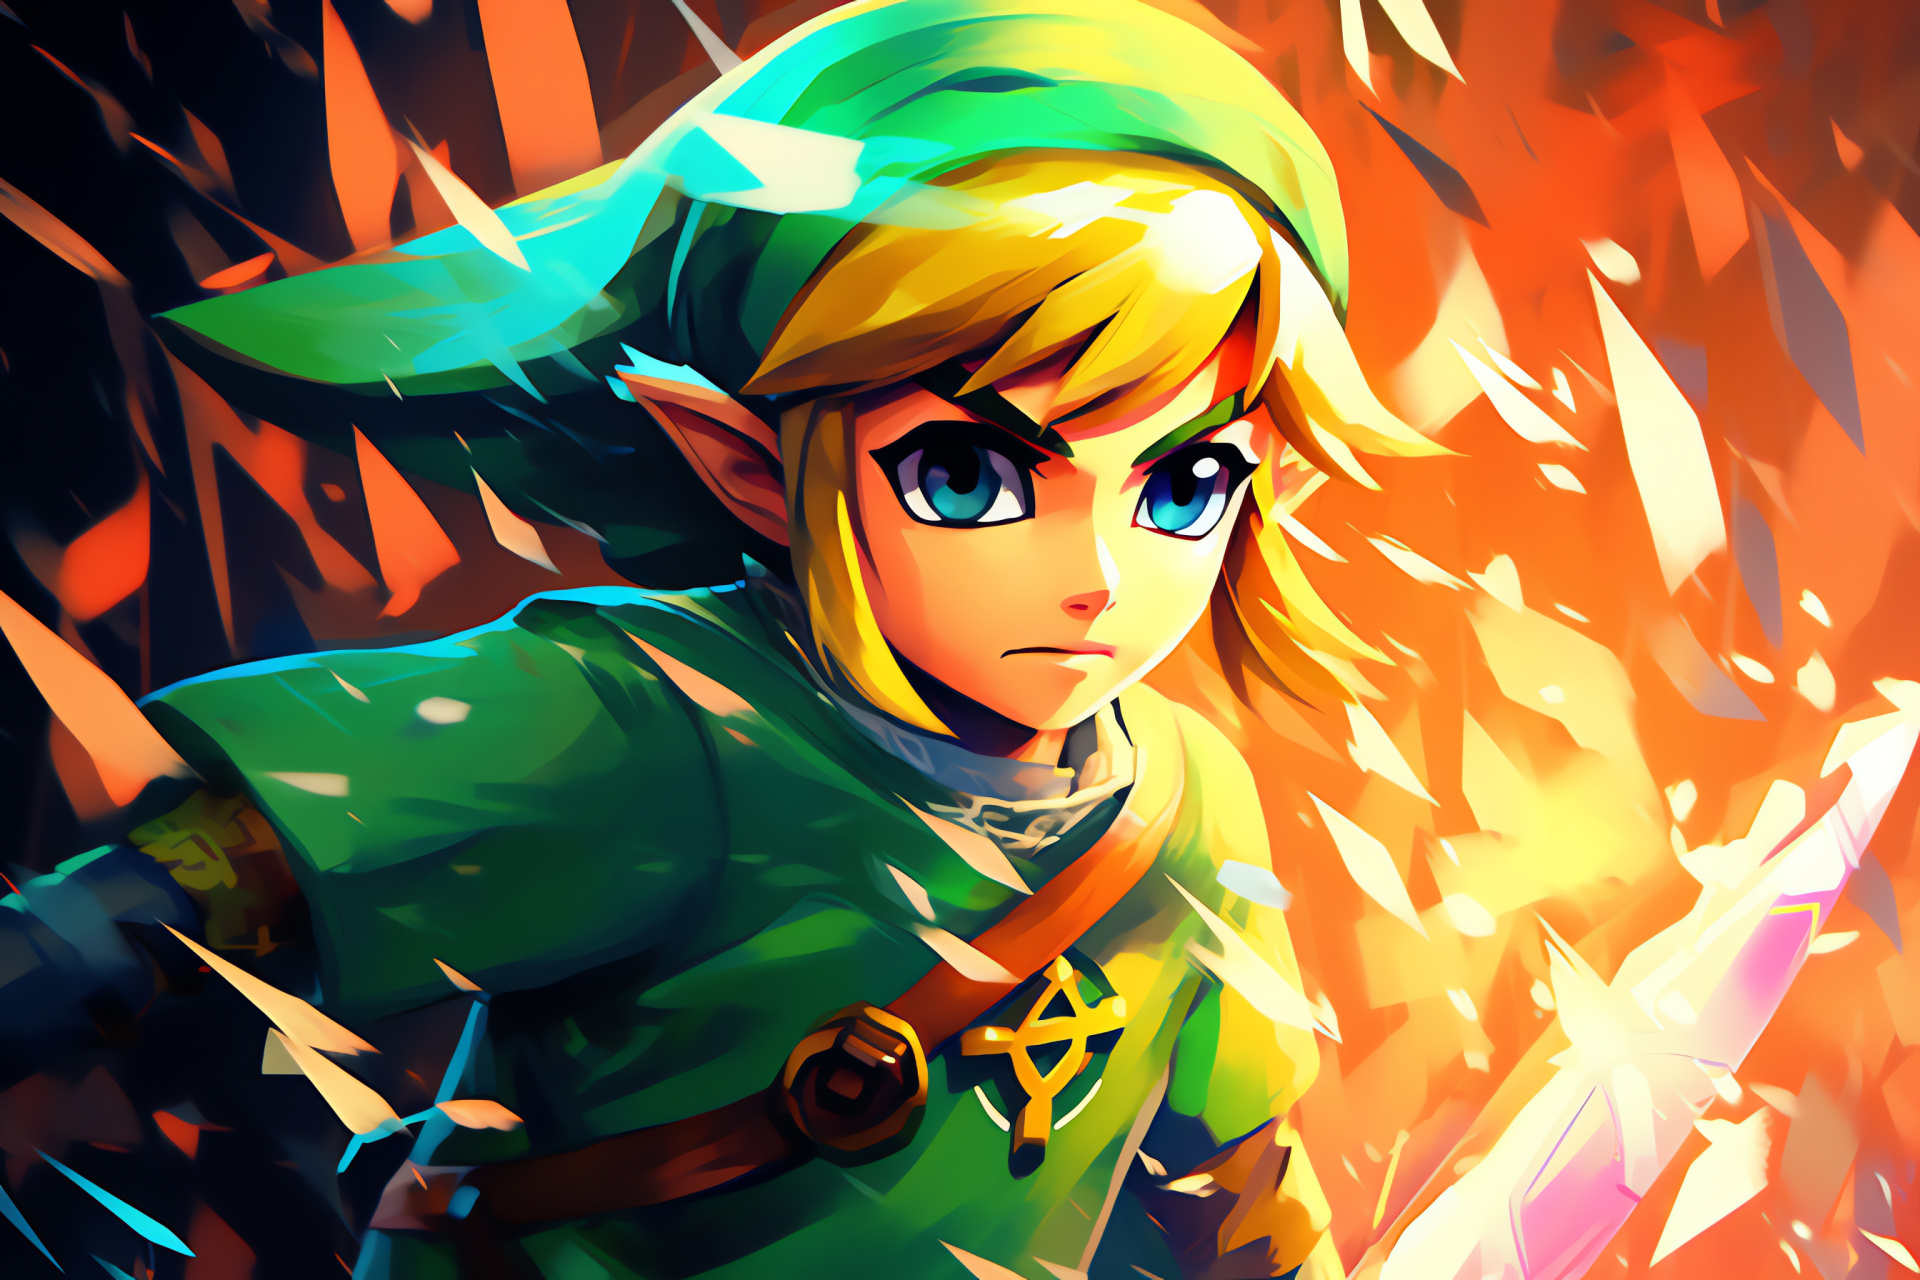 Toon Link quest, Wind Waker heroic journey, Mission to rescue sibling, Adventure at sea, Familial bonds, HD Desktop Image